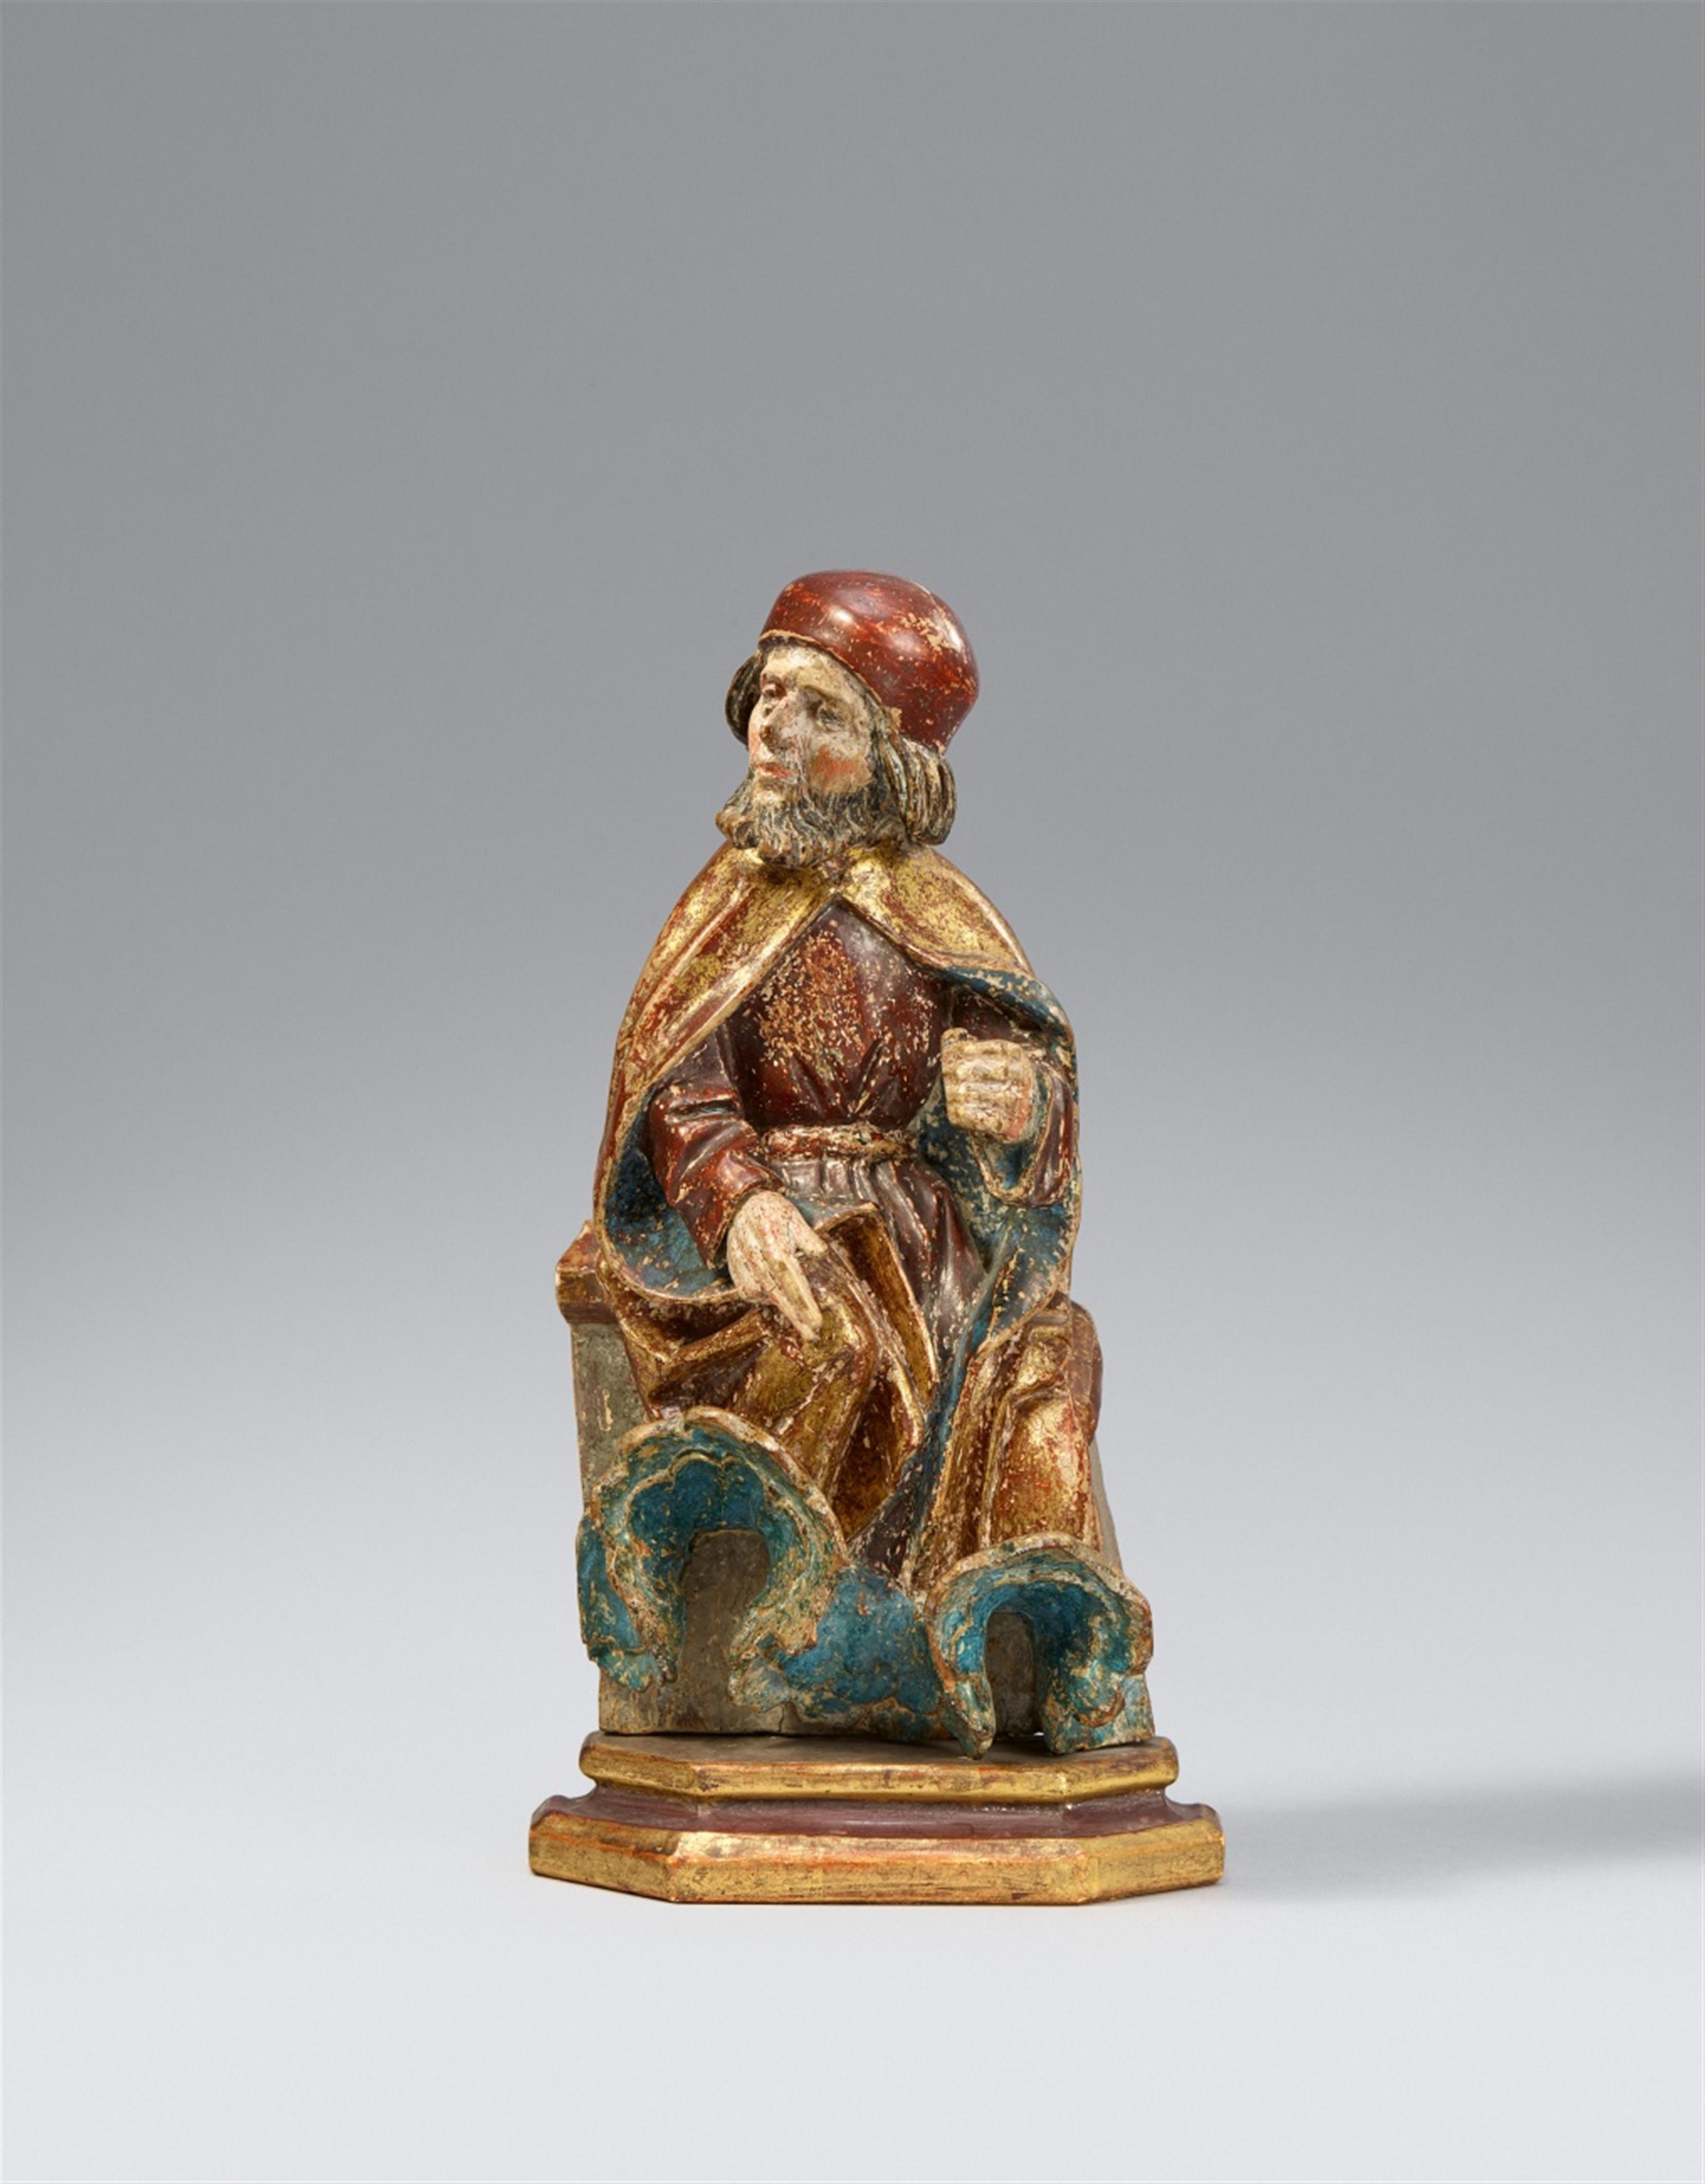 Flemish 1st half 16th century - A Flemish carved wooden figure, 1st half 16th century, possibly an Old Testament prophet - image-1